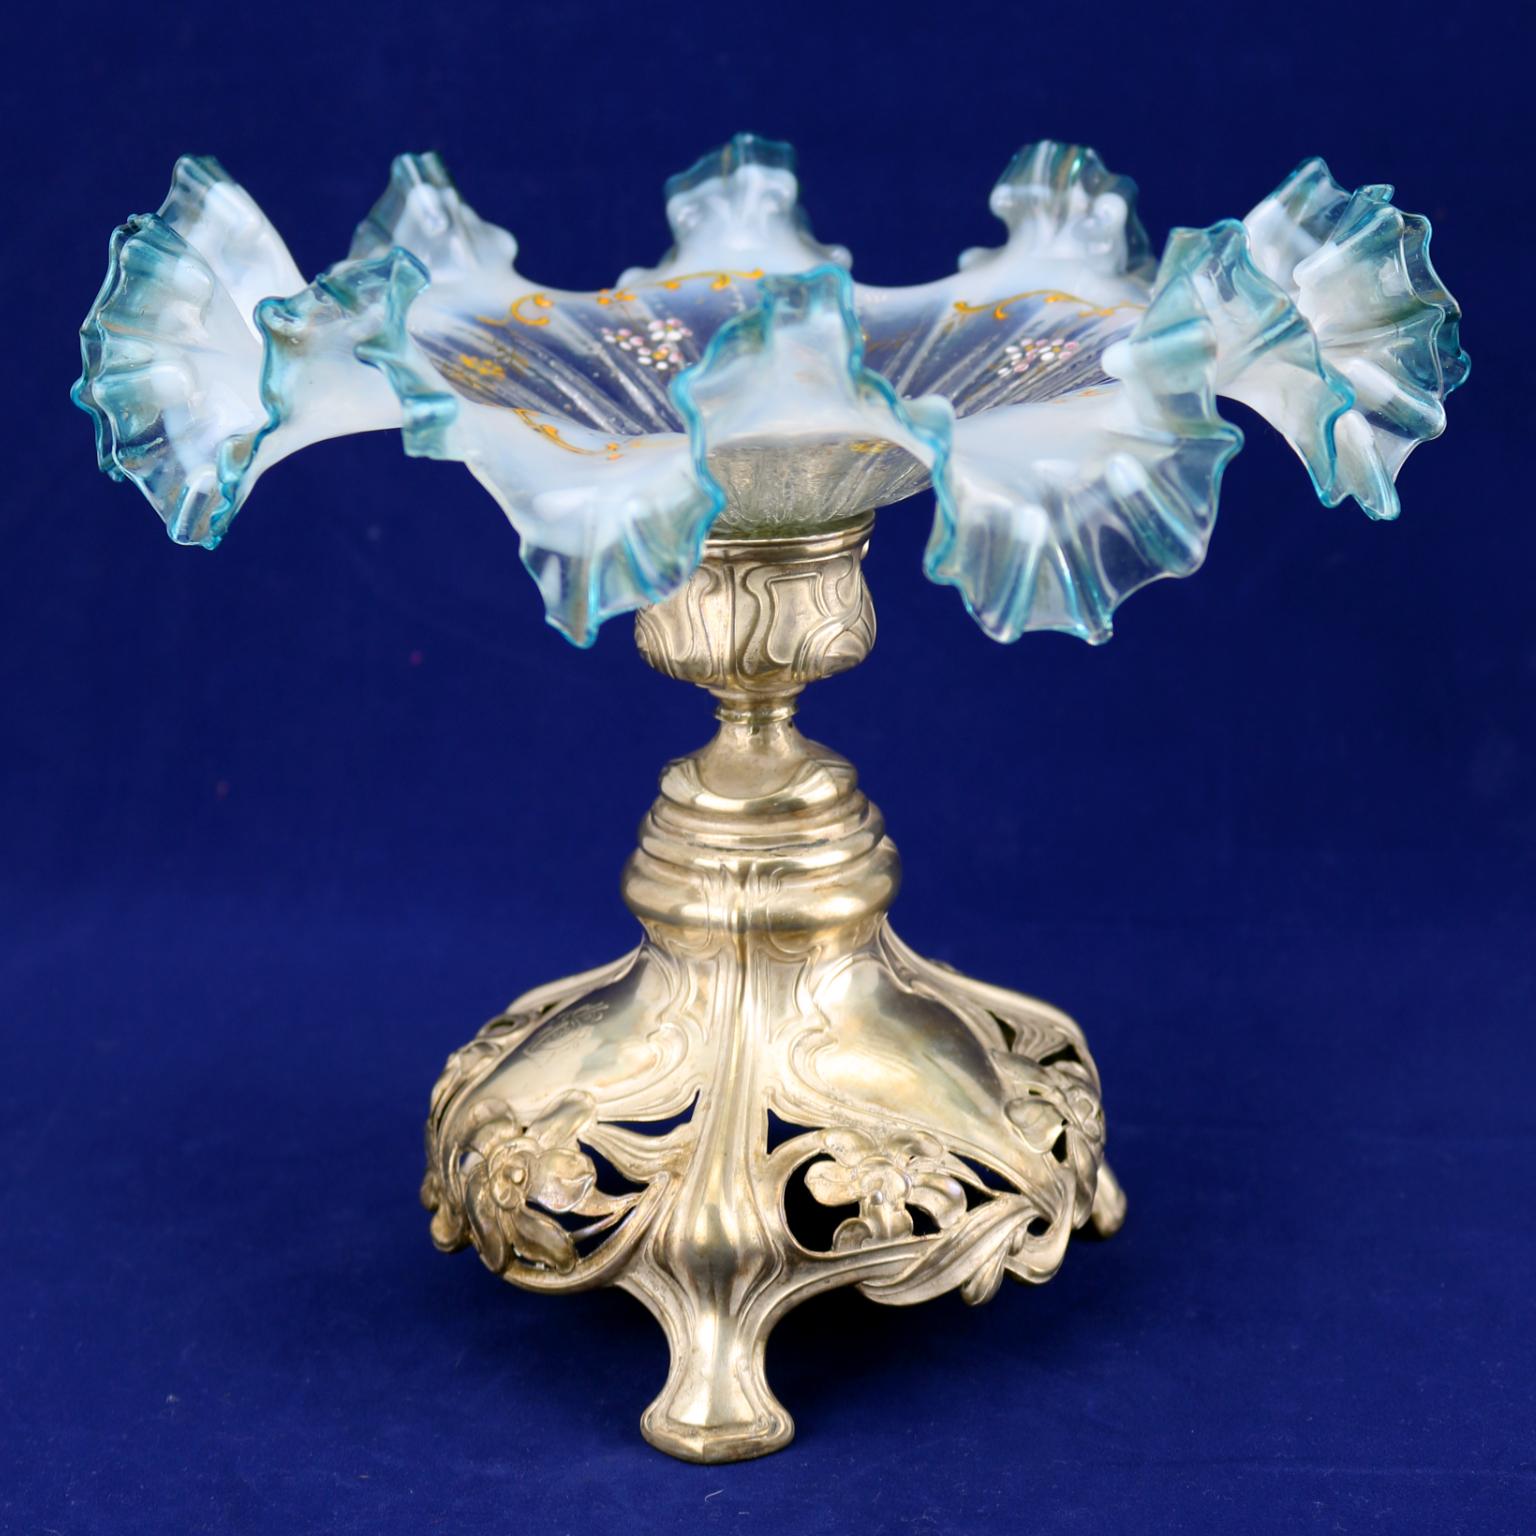 Art Nouveau silver centrepiece circa 1900, small damages on the glass.
Fully hallmarked silver 800/1000.
Weight of silver 184grams.